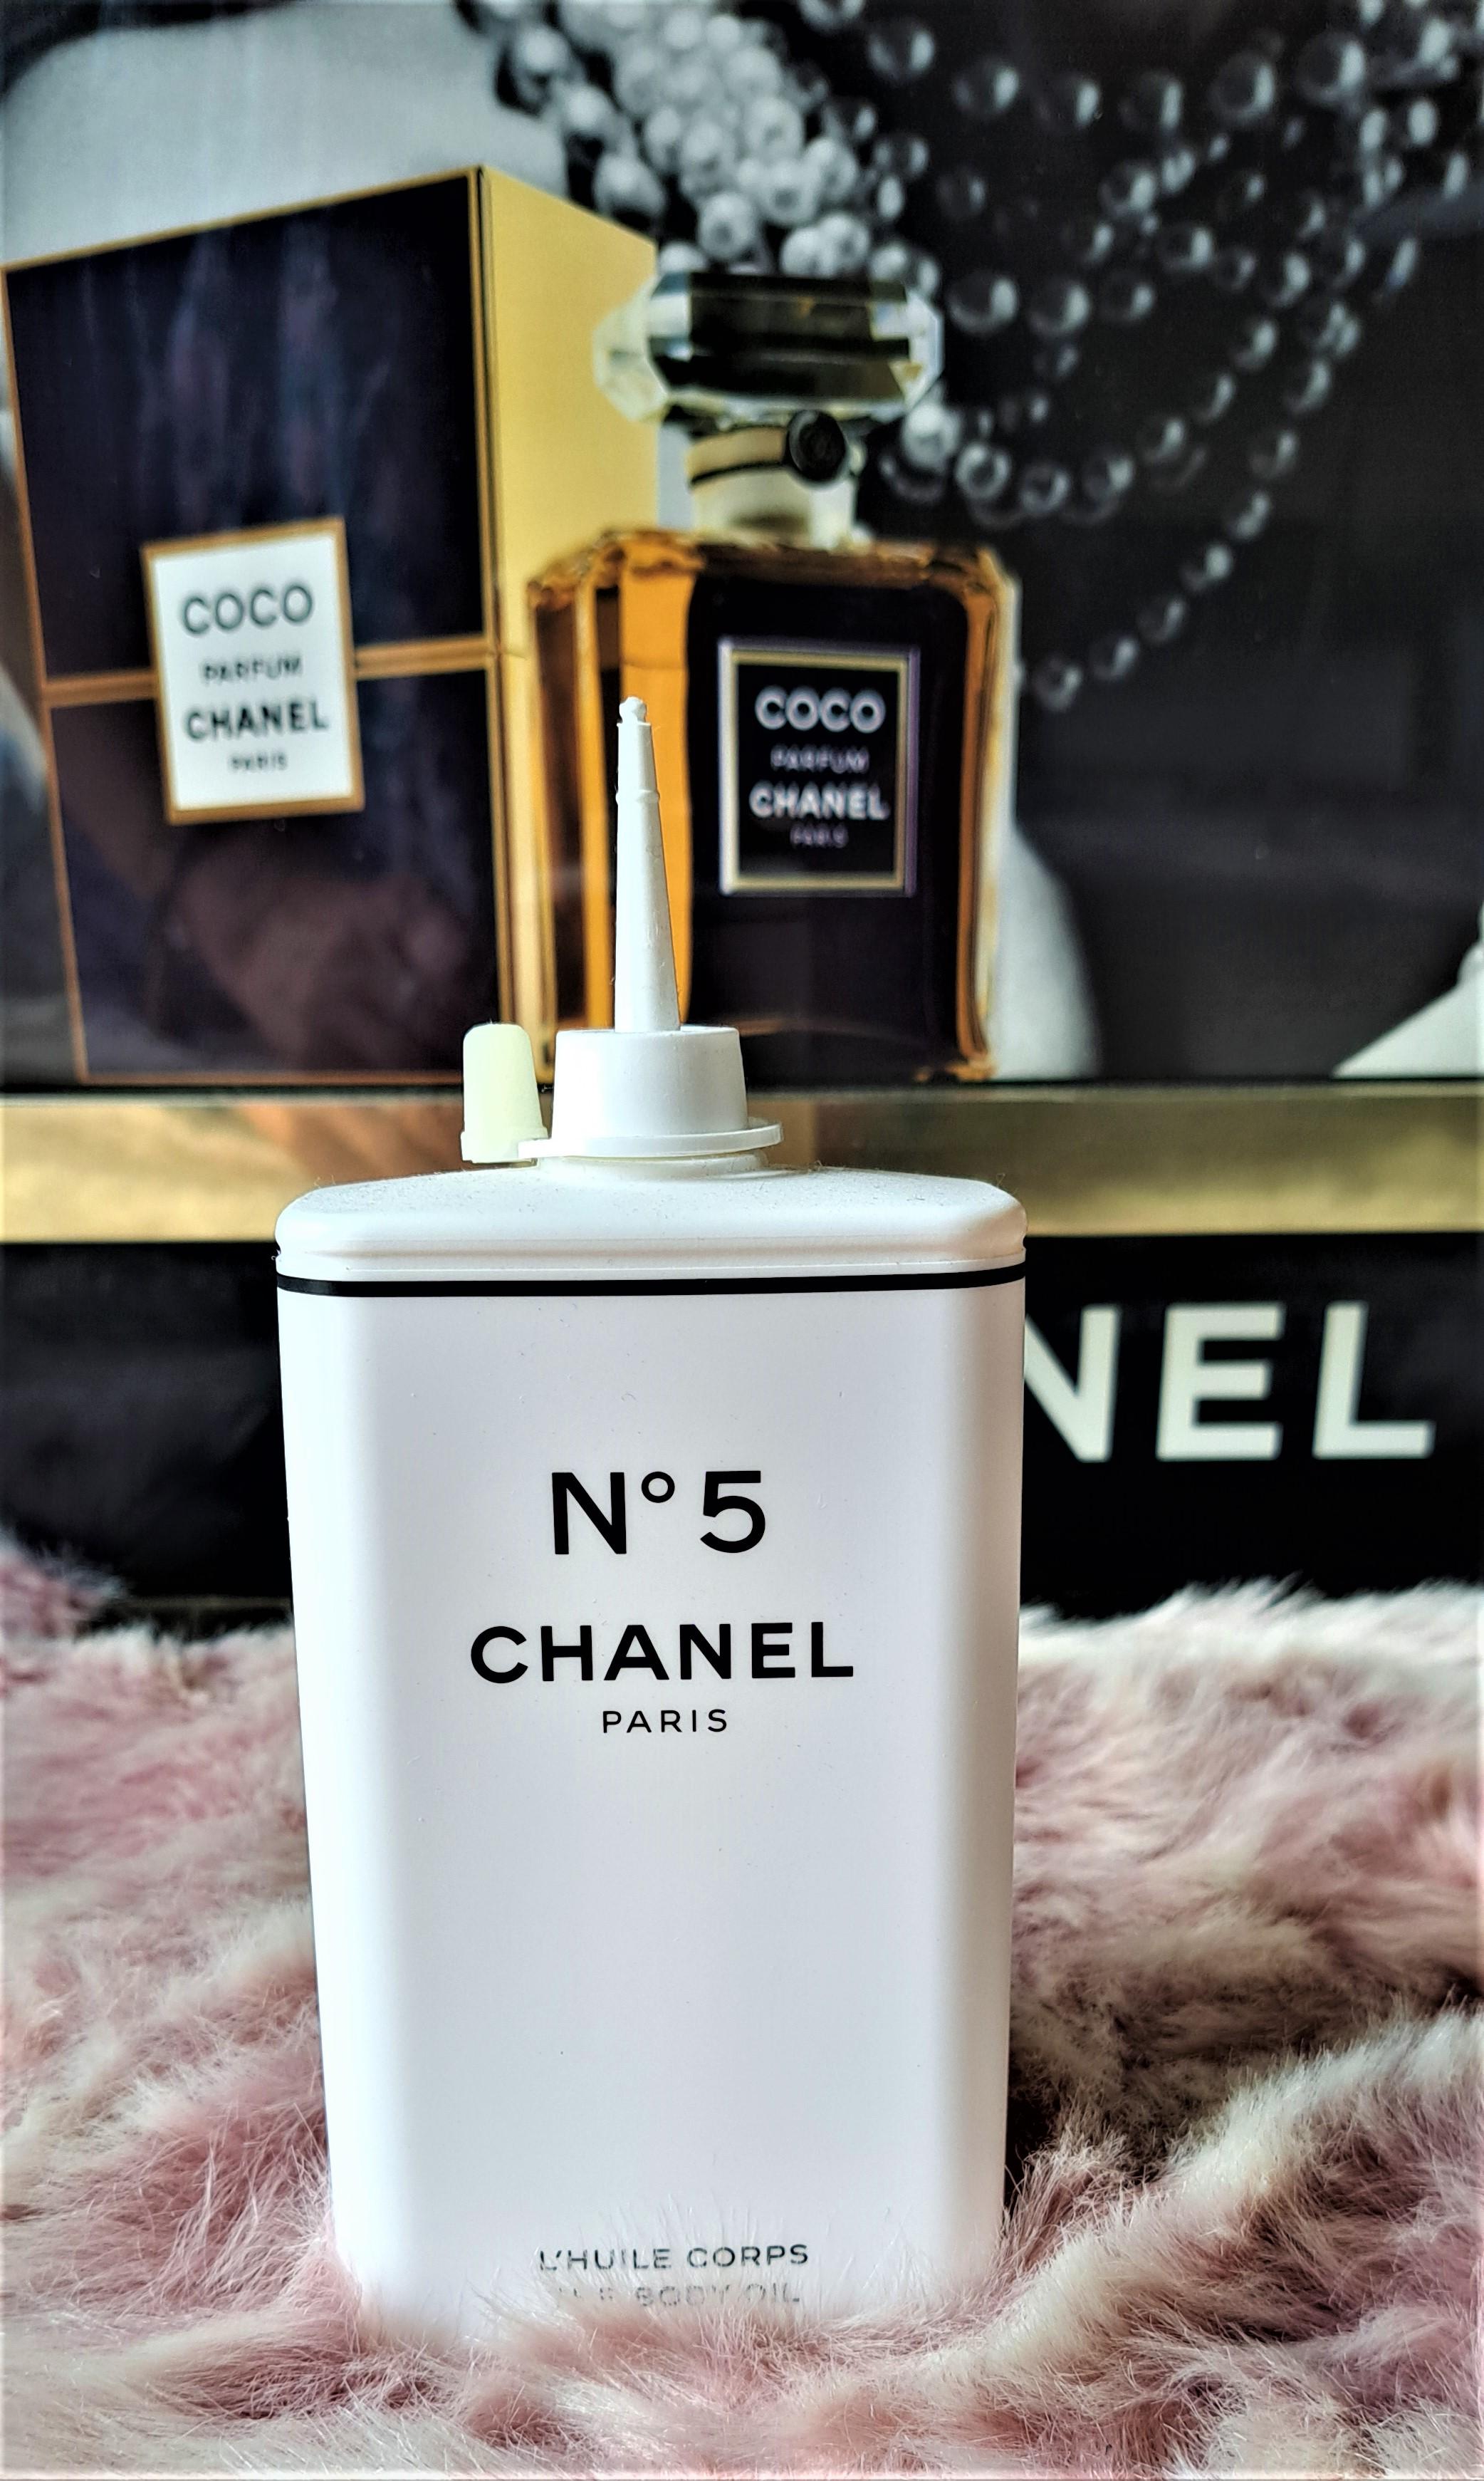 Limited Edition for collectors. Very hard to find. 

Chanel's Factory 5 collection is here, and it's another reason why I'm so in love with the brand.

Chanel has a long history of turning unexpected ideas into cult designs, and I've been a fan of